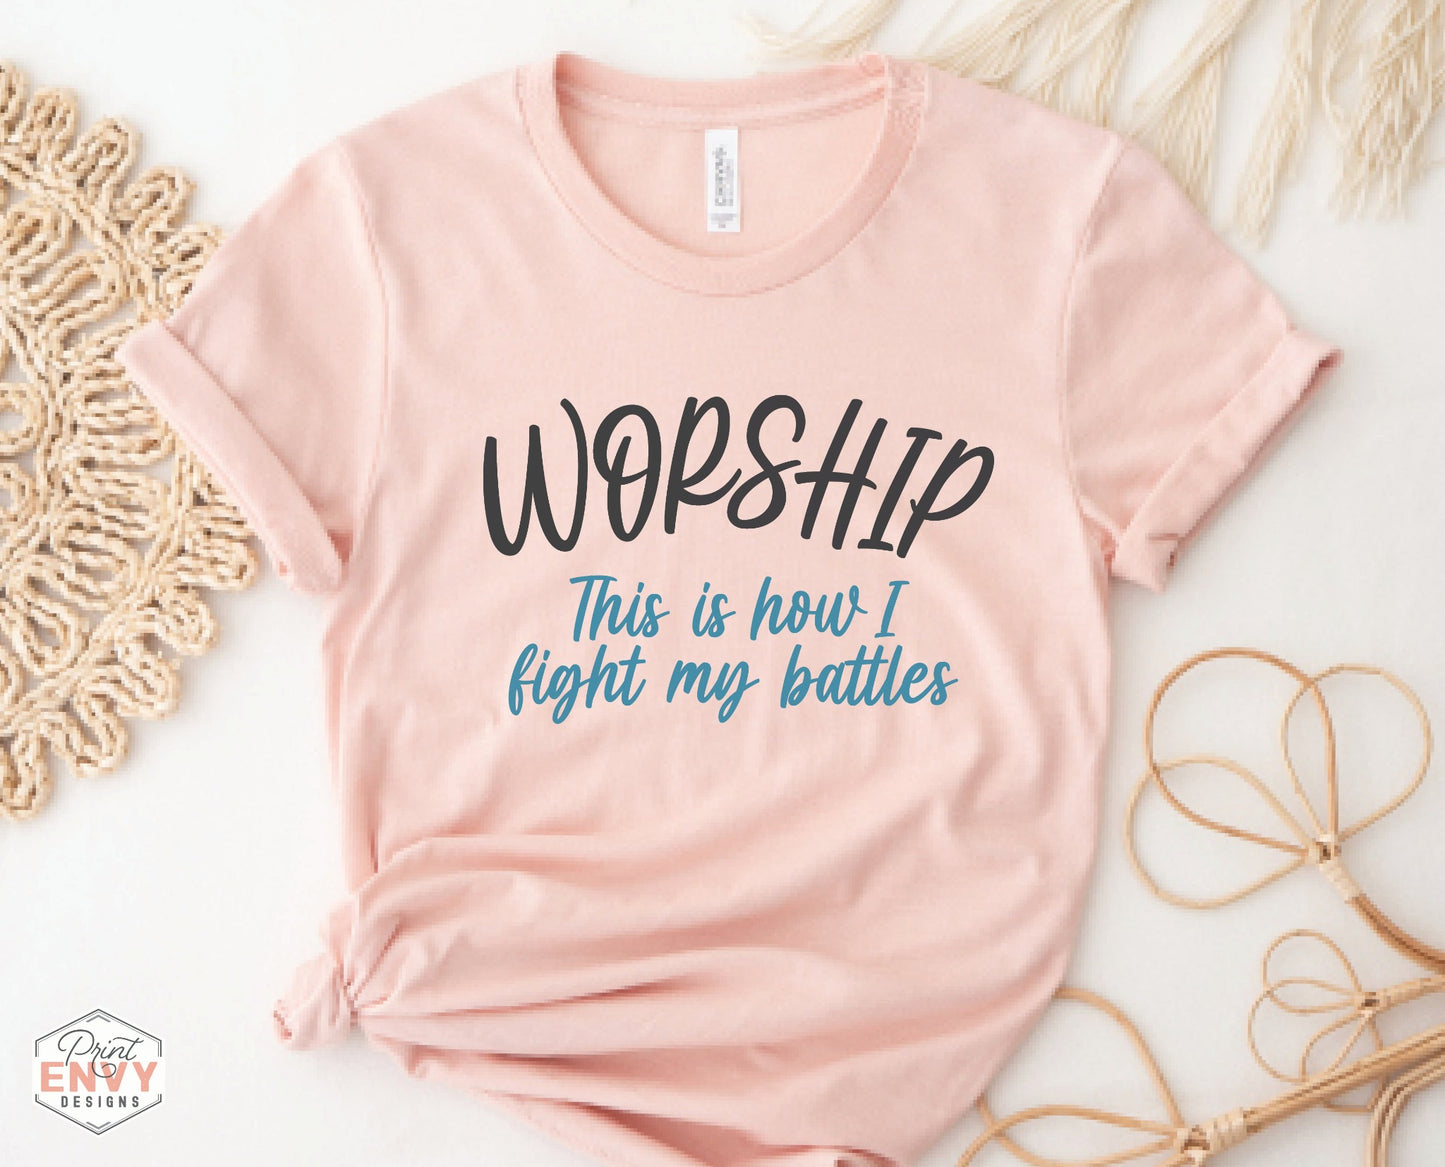 Worship This Is How I Fight My Battles Christian aesthetic t-shirt design printed on soft heather prism peach tee for women, great gift for worship leaders